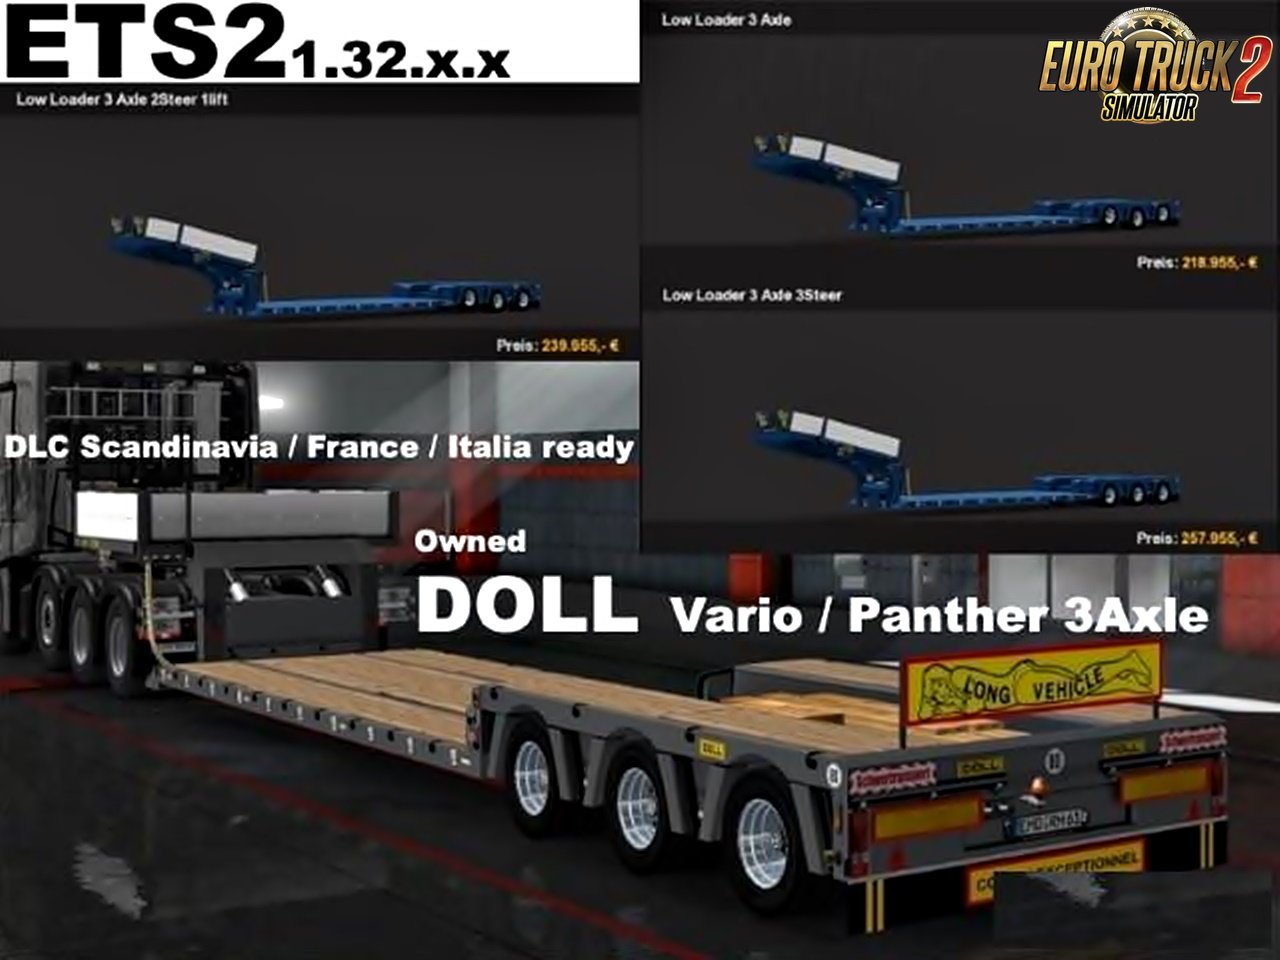 Doll 3Axle low loader owned v7